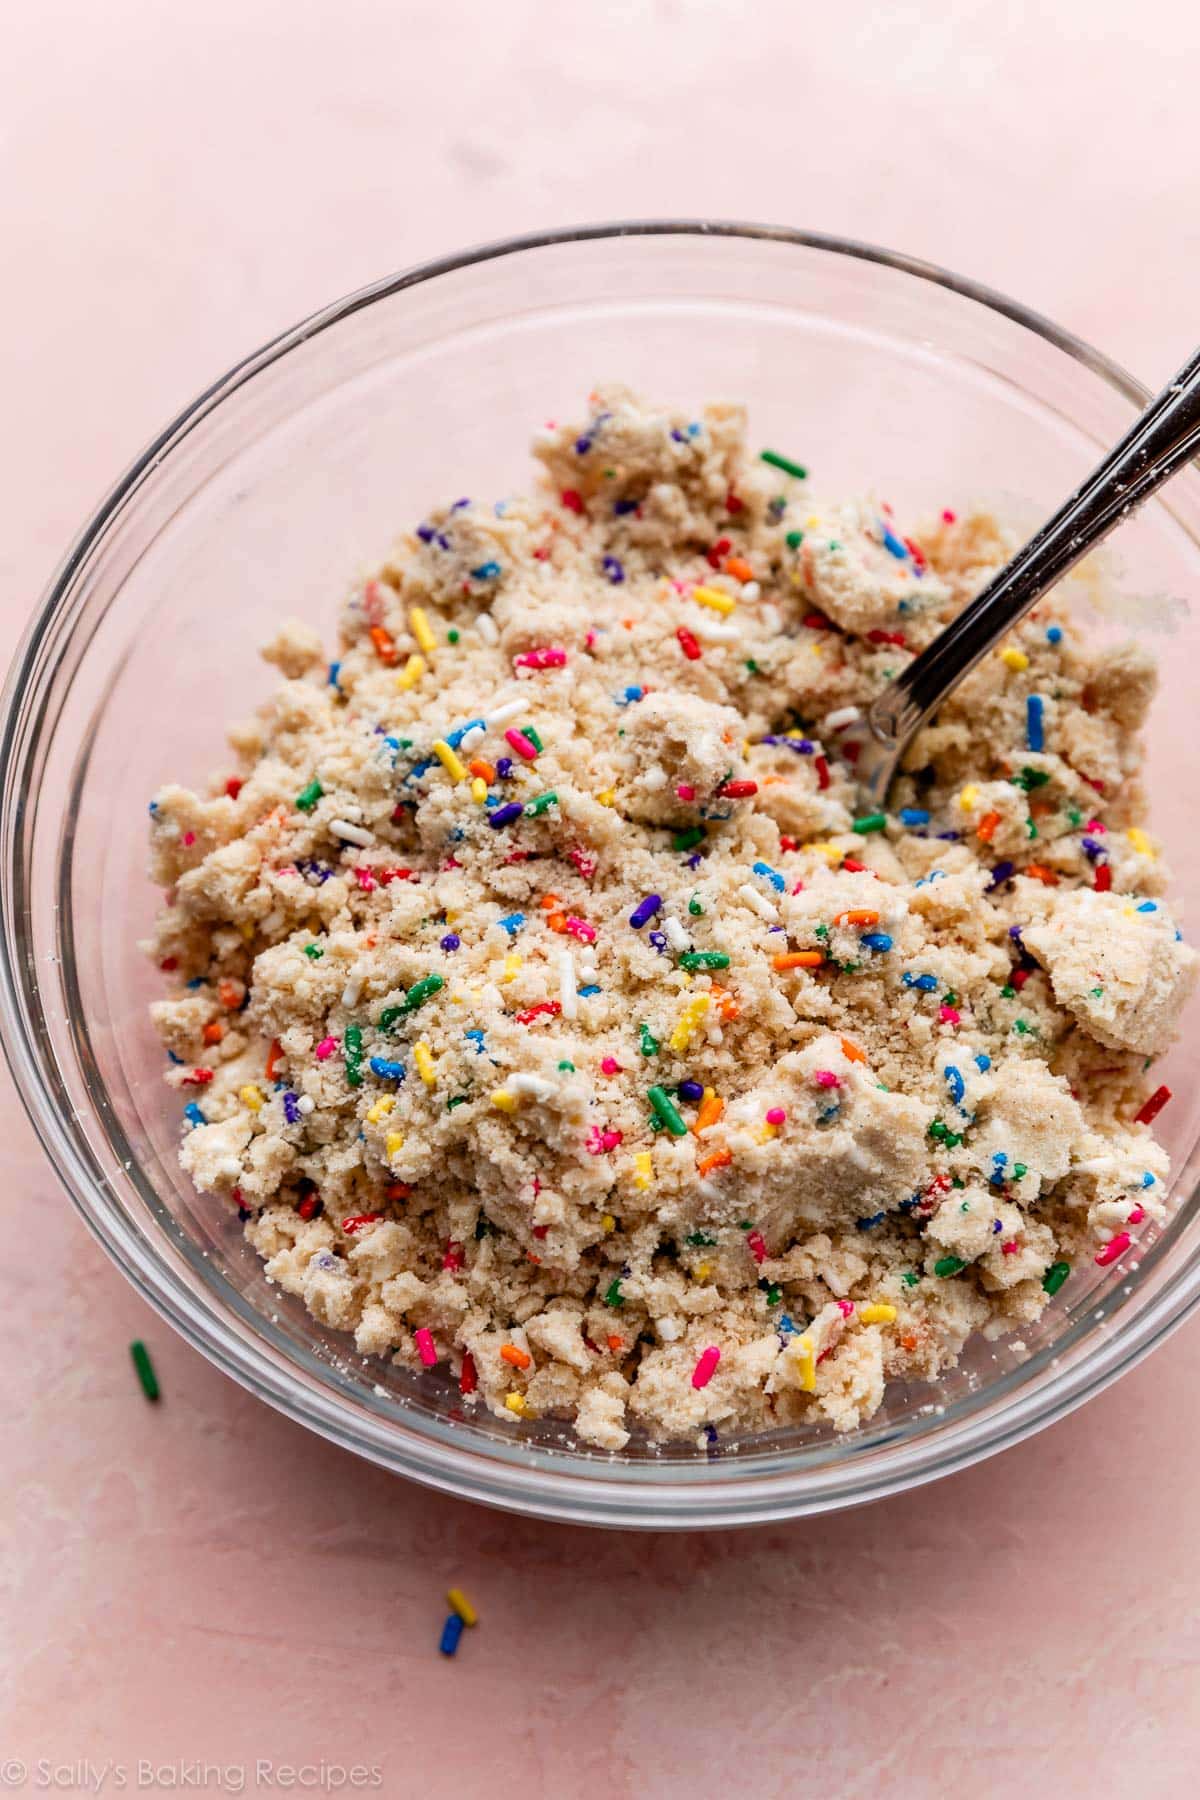 crumble mixture with rainbow sprinkles in glass bowl on pink surface.